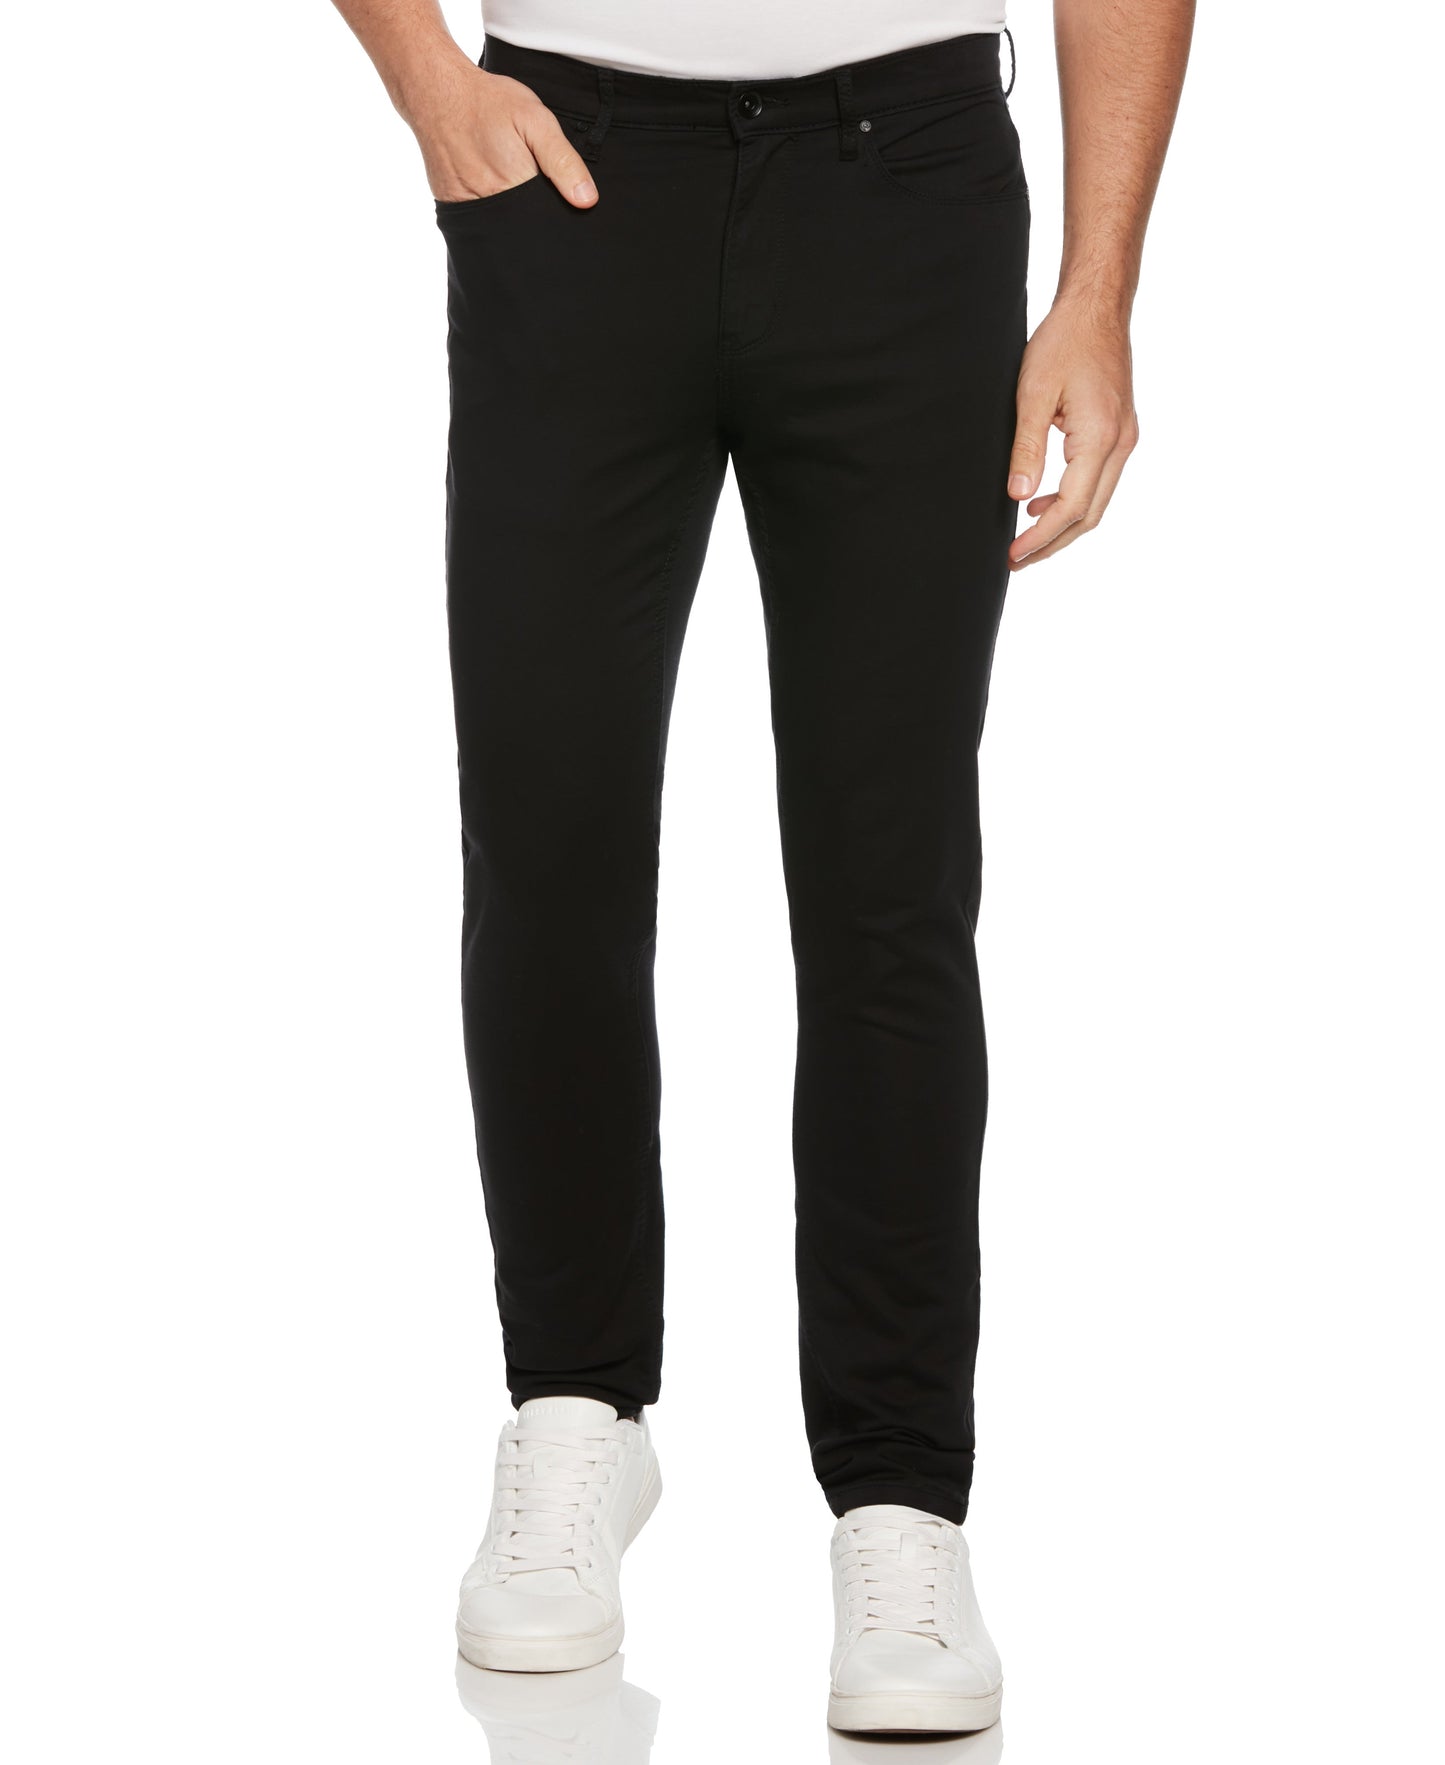 Skinny Fit Anywhere Pant